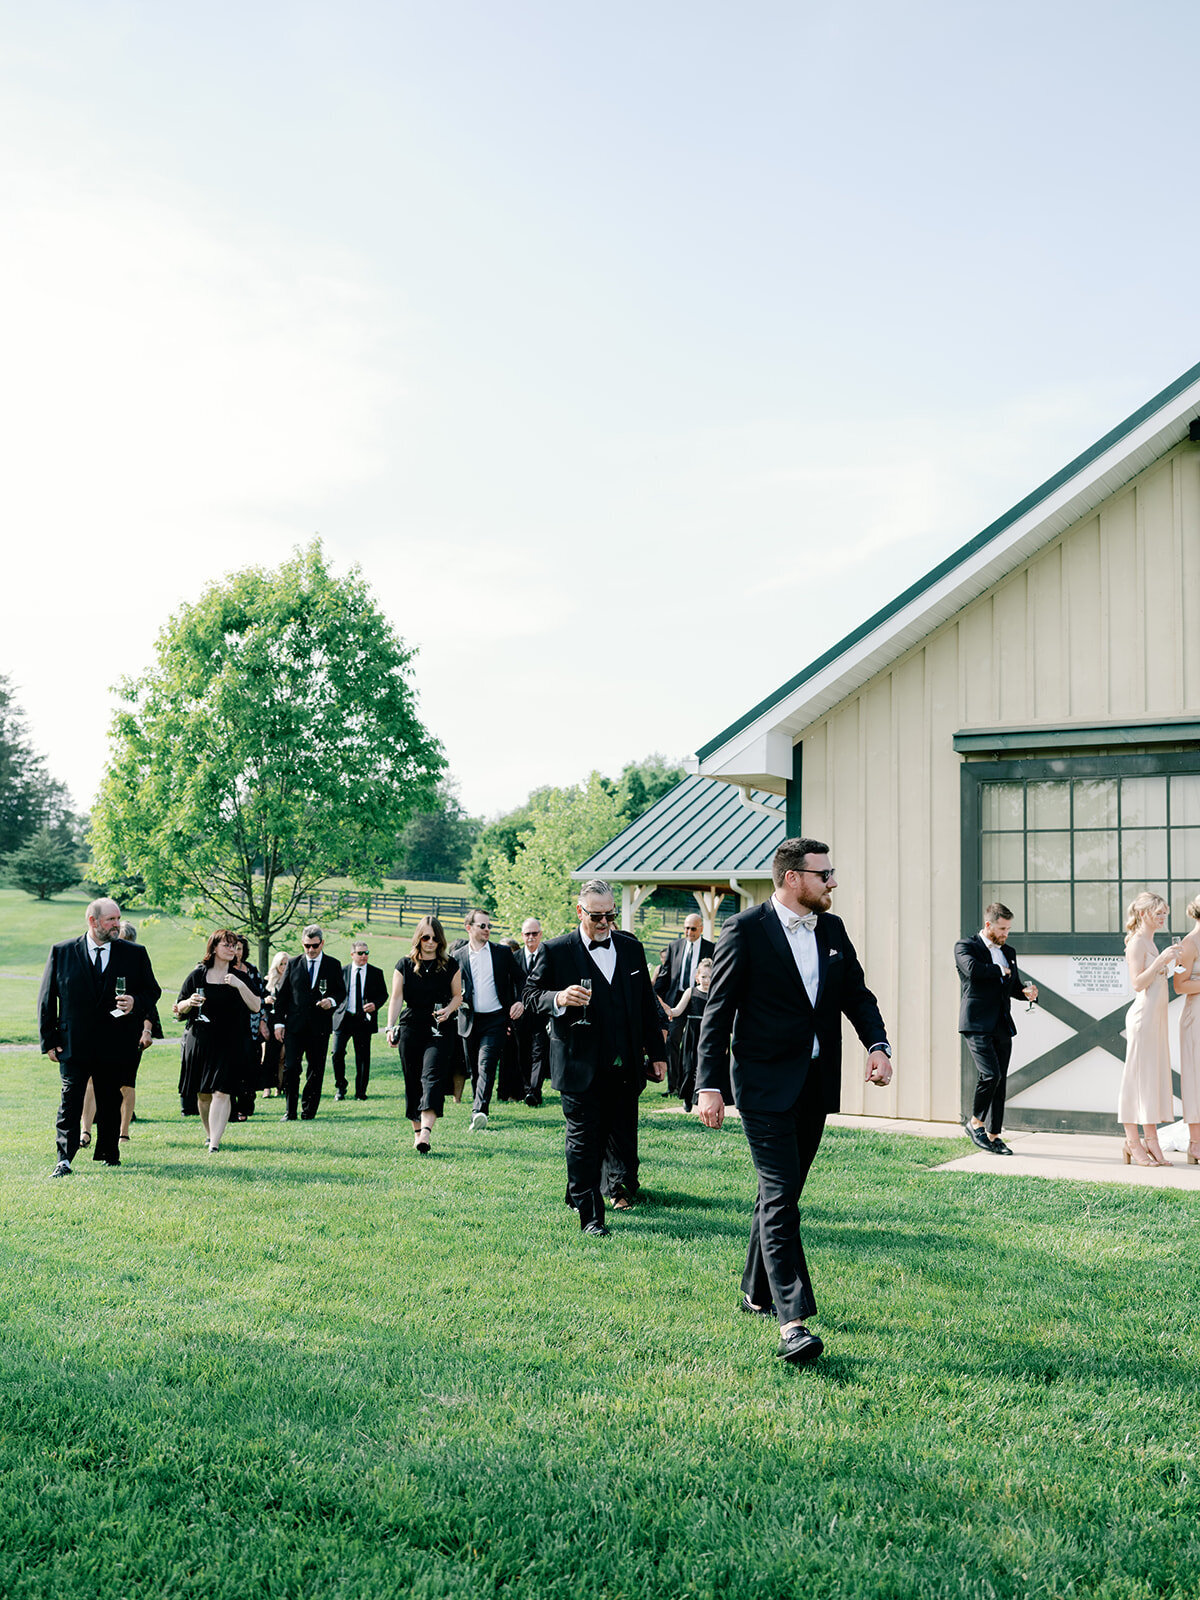 Guests wearing all black walk towards wedding ceremony space